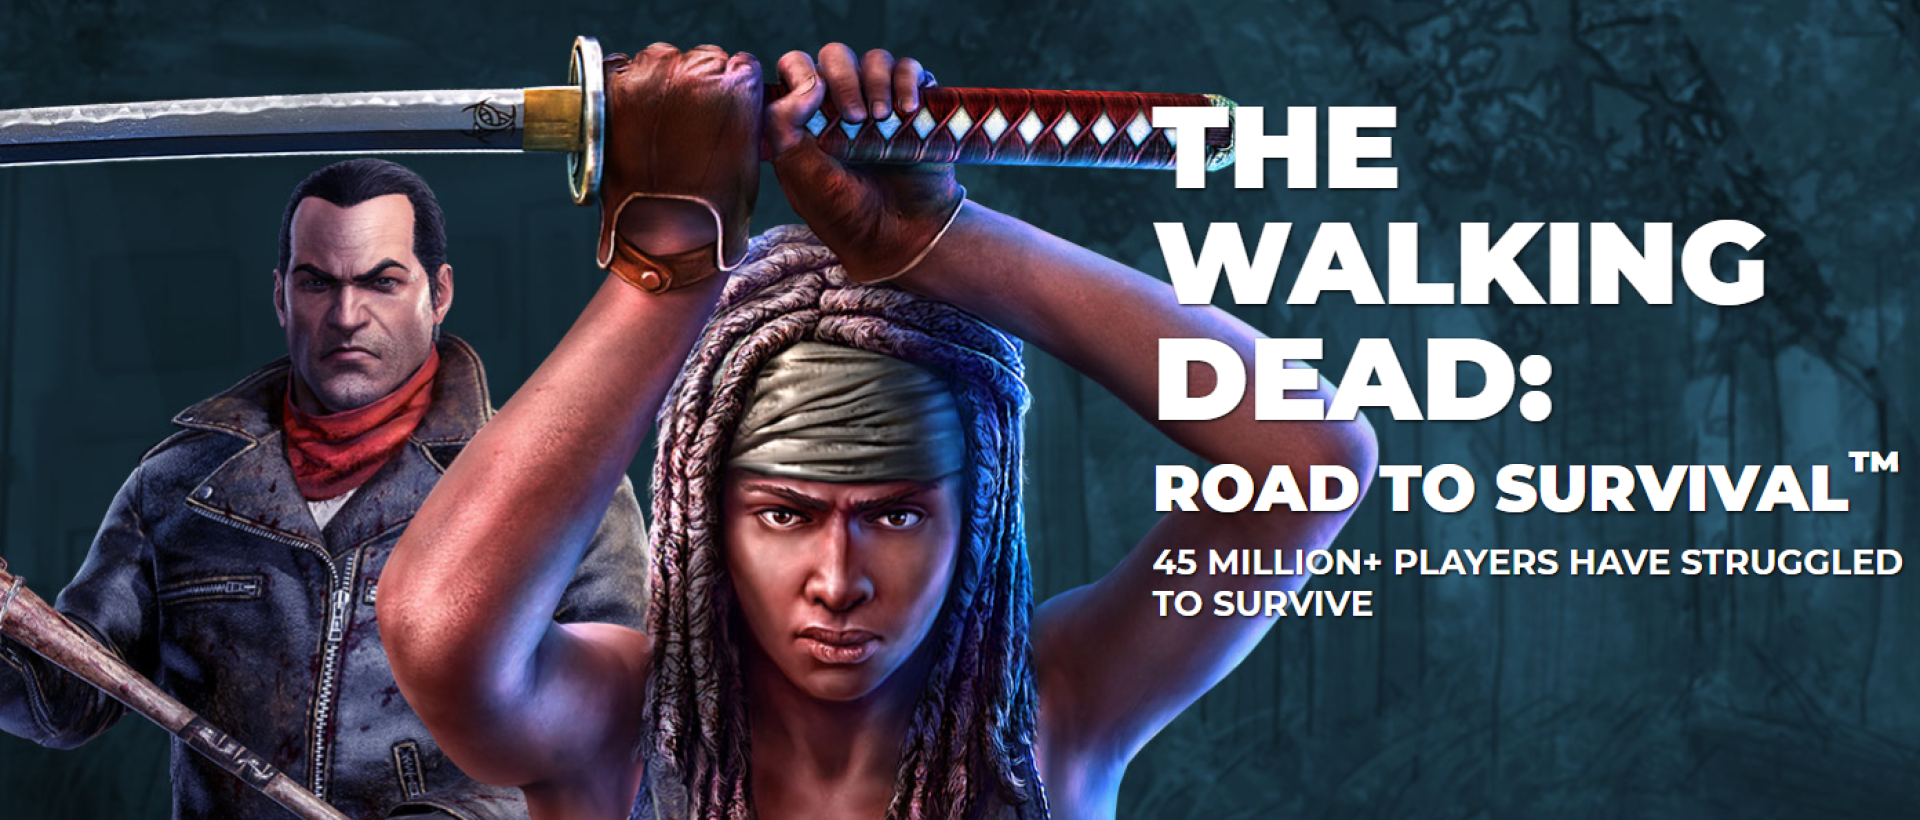 download free the walking dead road to survival initial release date